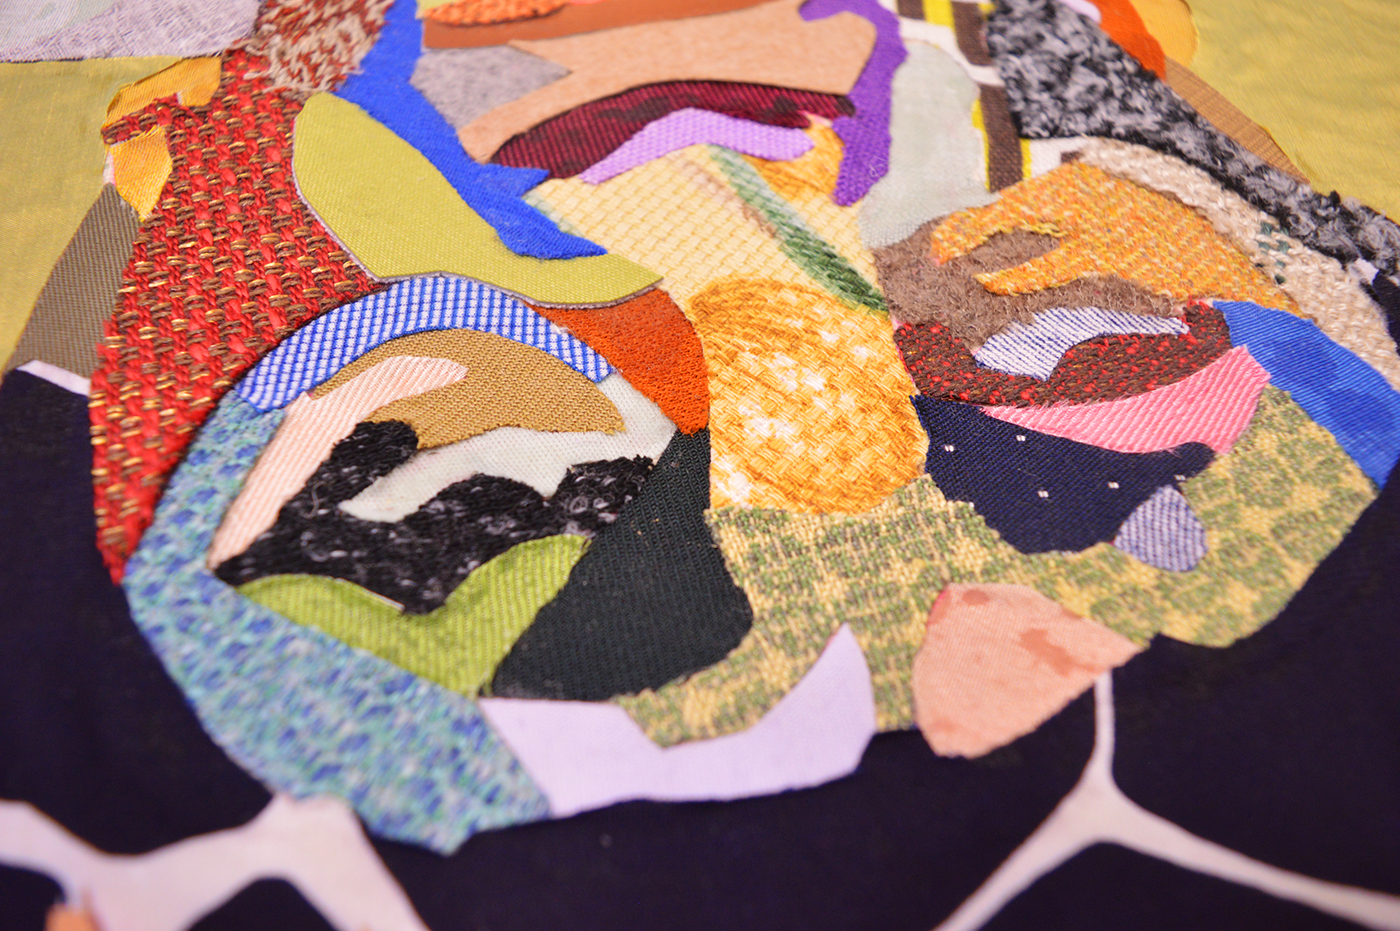 fabric collage series portraits